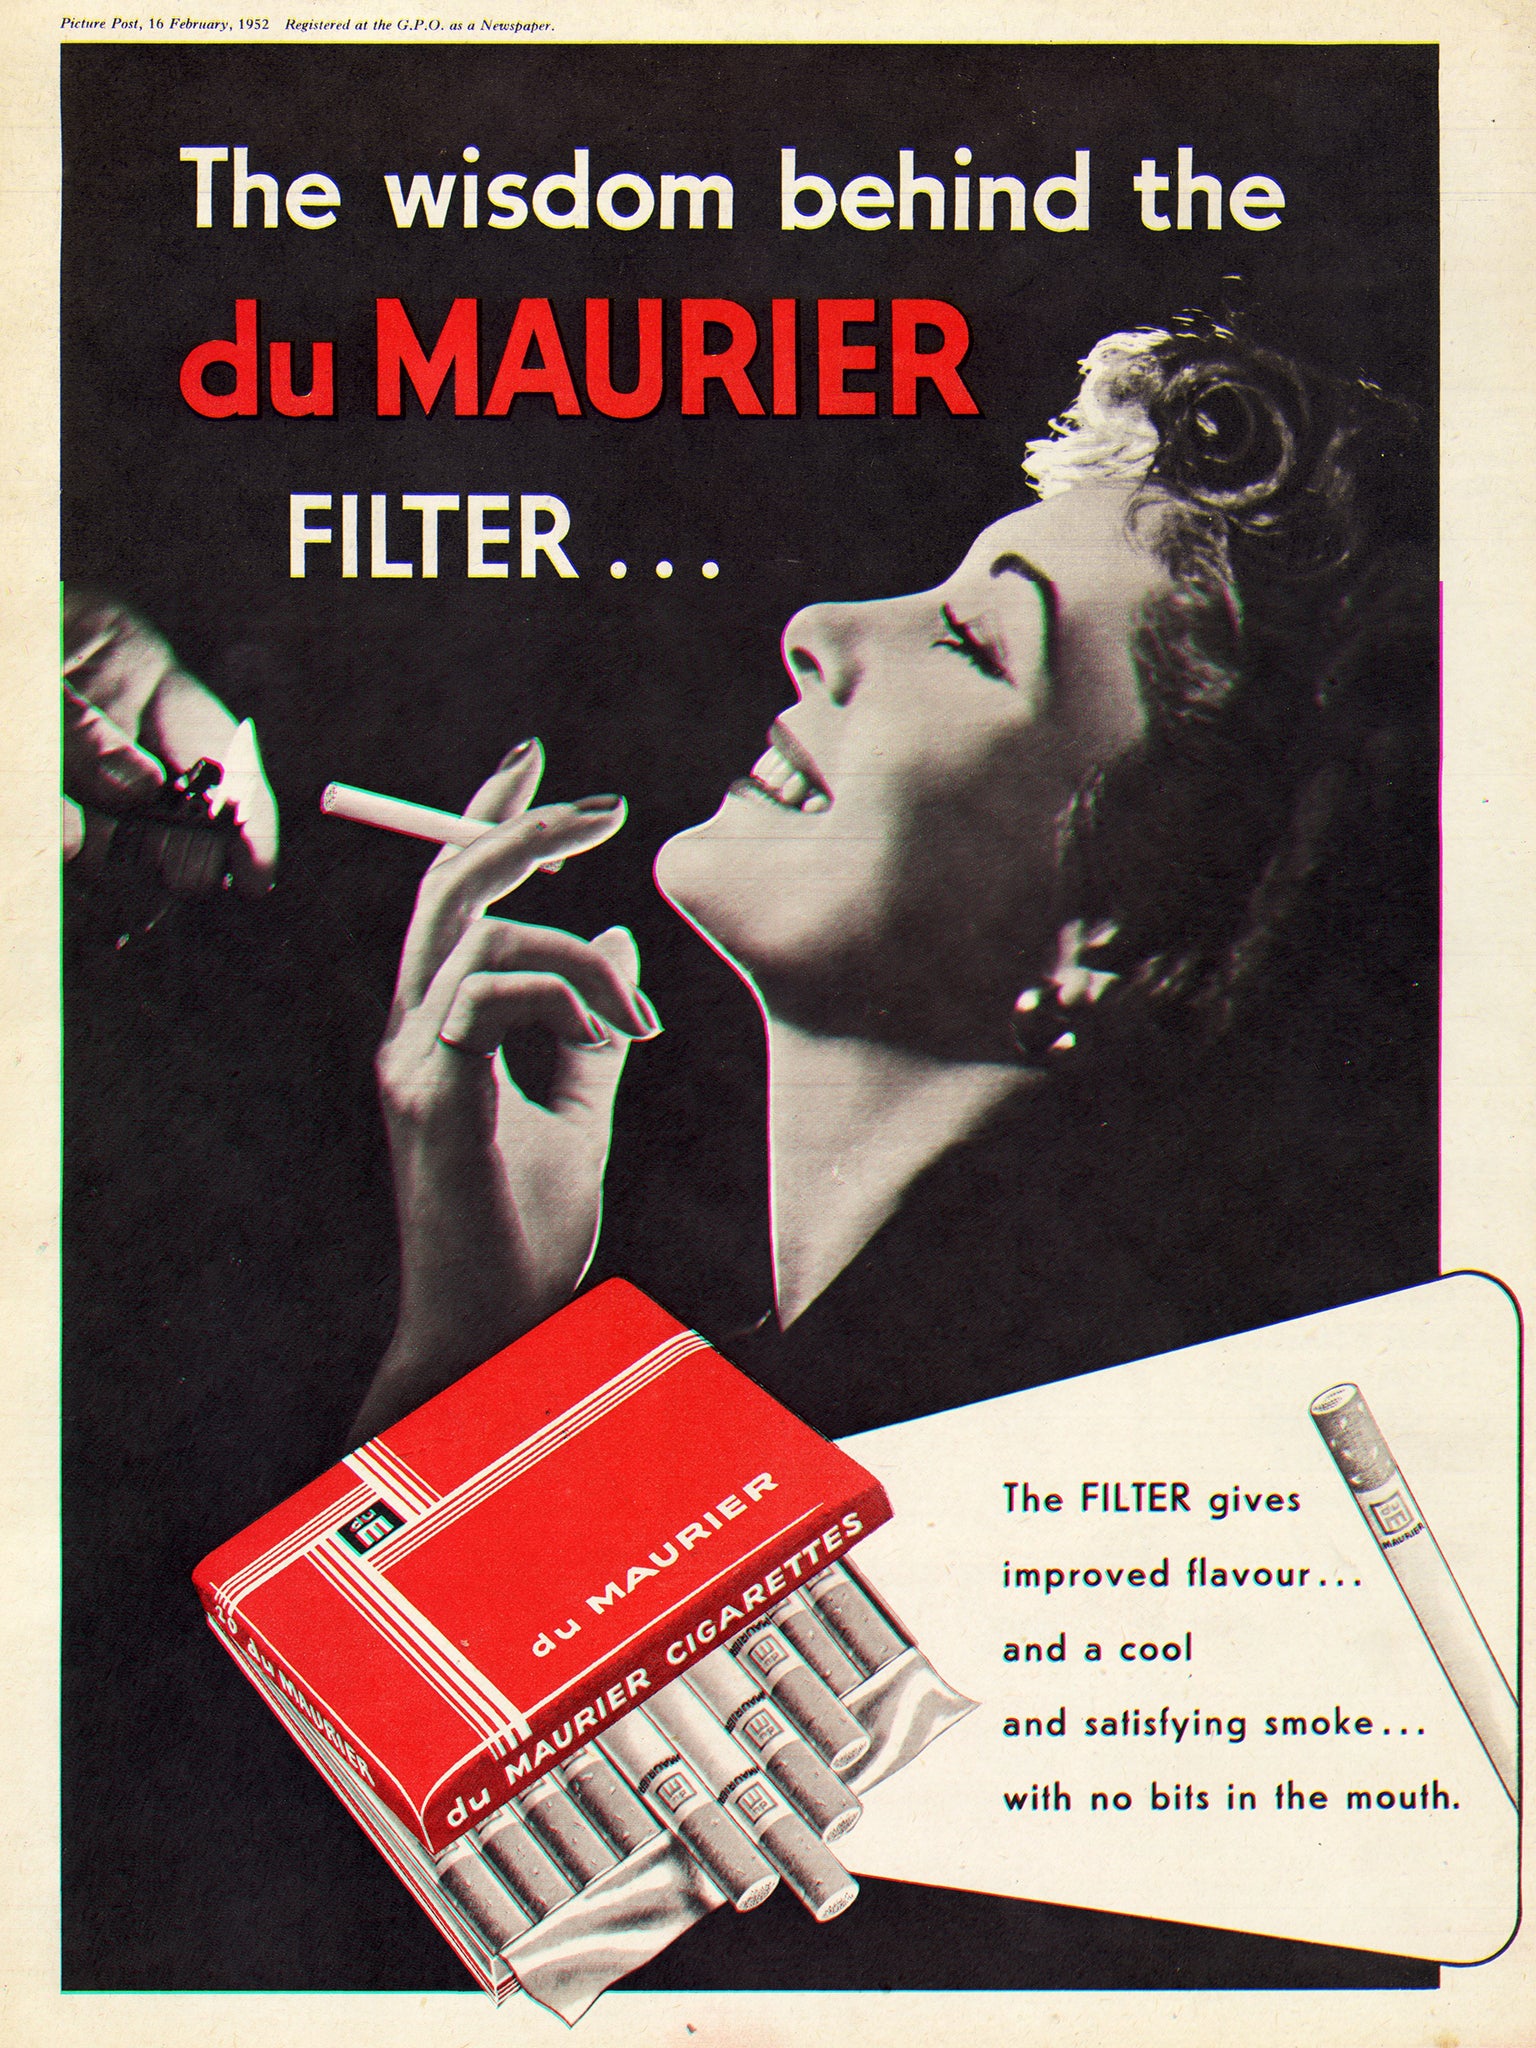 'The wisdom behind the Du Maurier filter', which claims to give the cigarette improved flavour and prevent bits of tobacco in the mouth